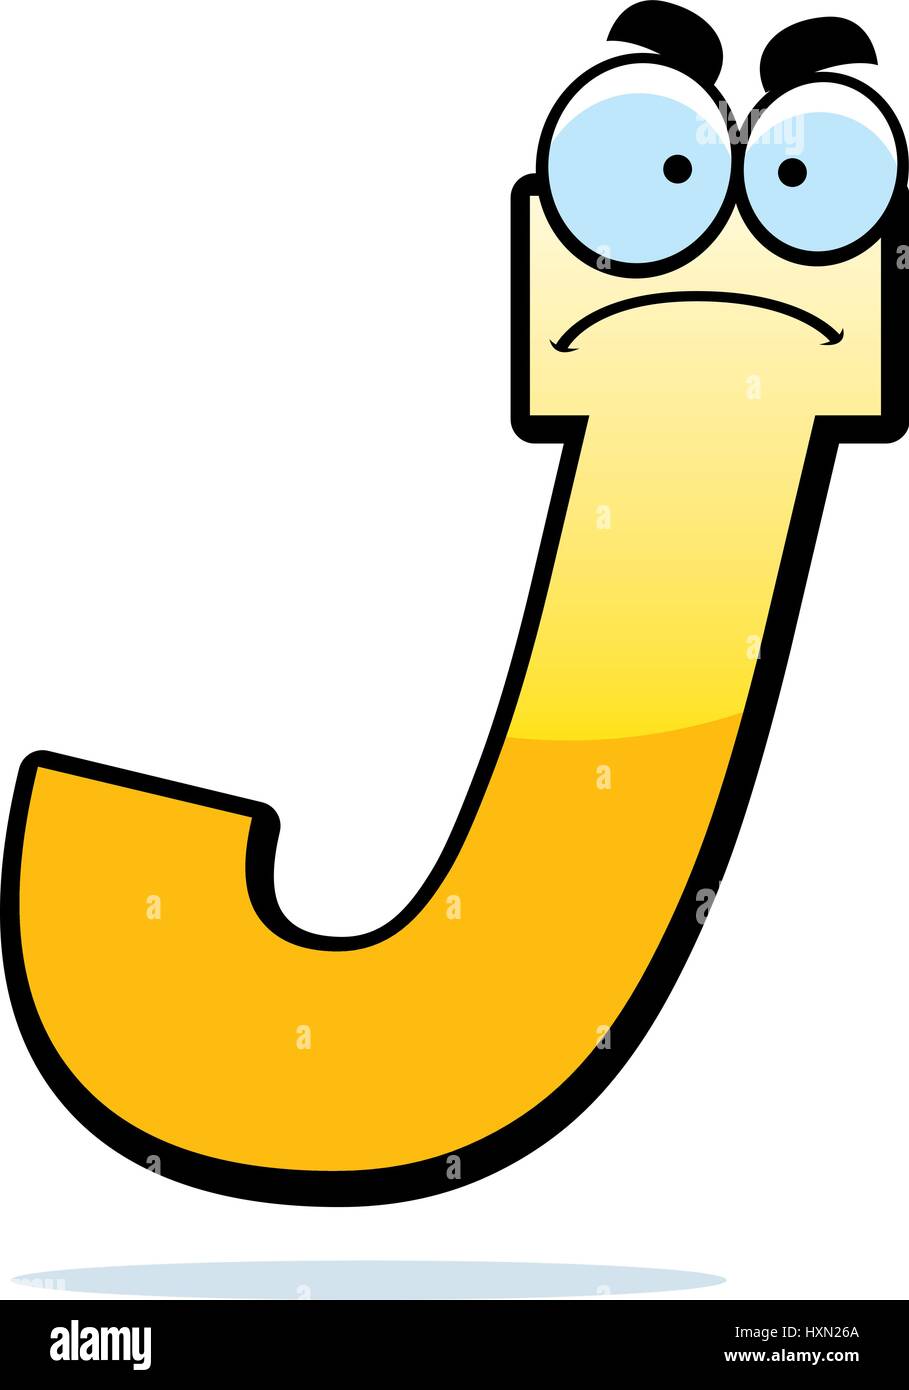 A Cartoon Illustration Of A Letter J With An Angry Expression Stock